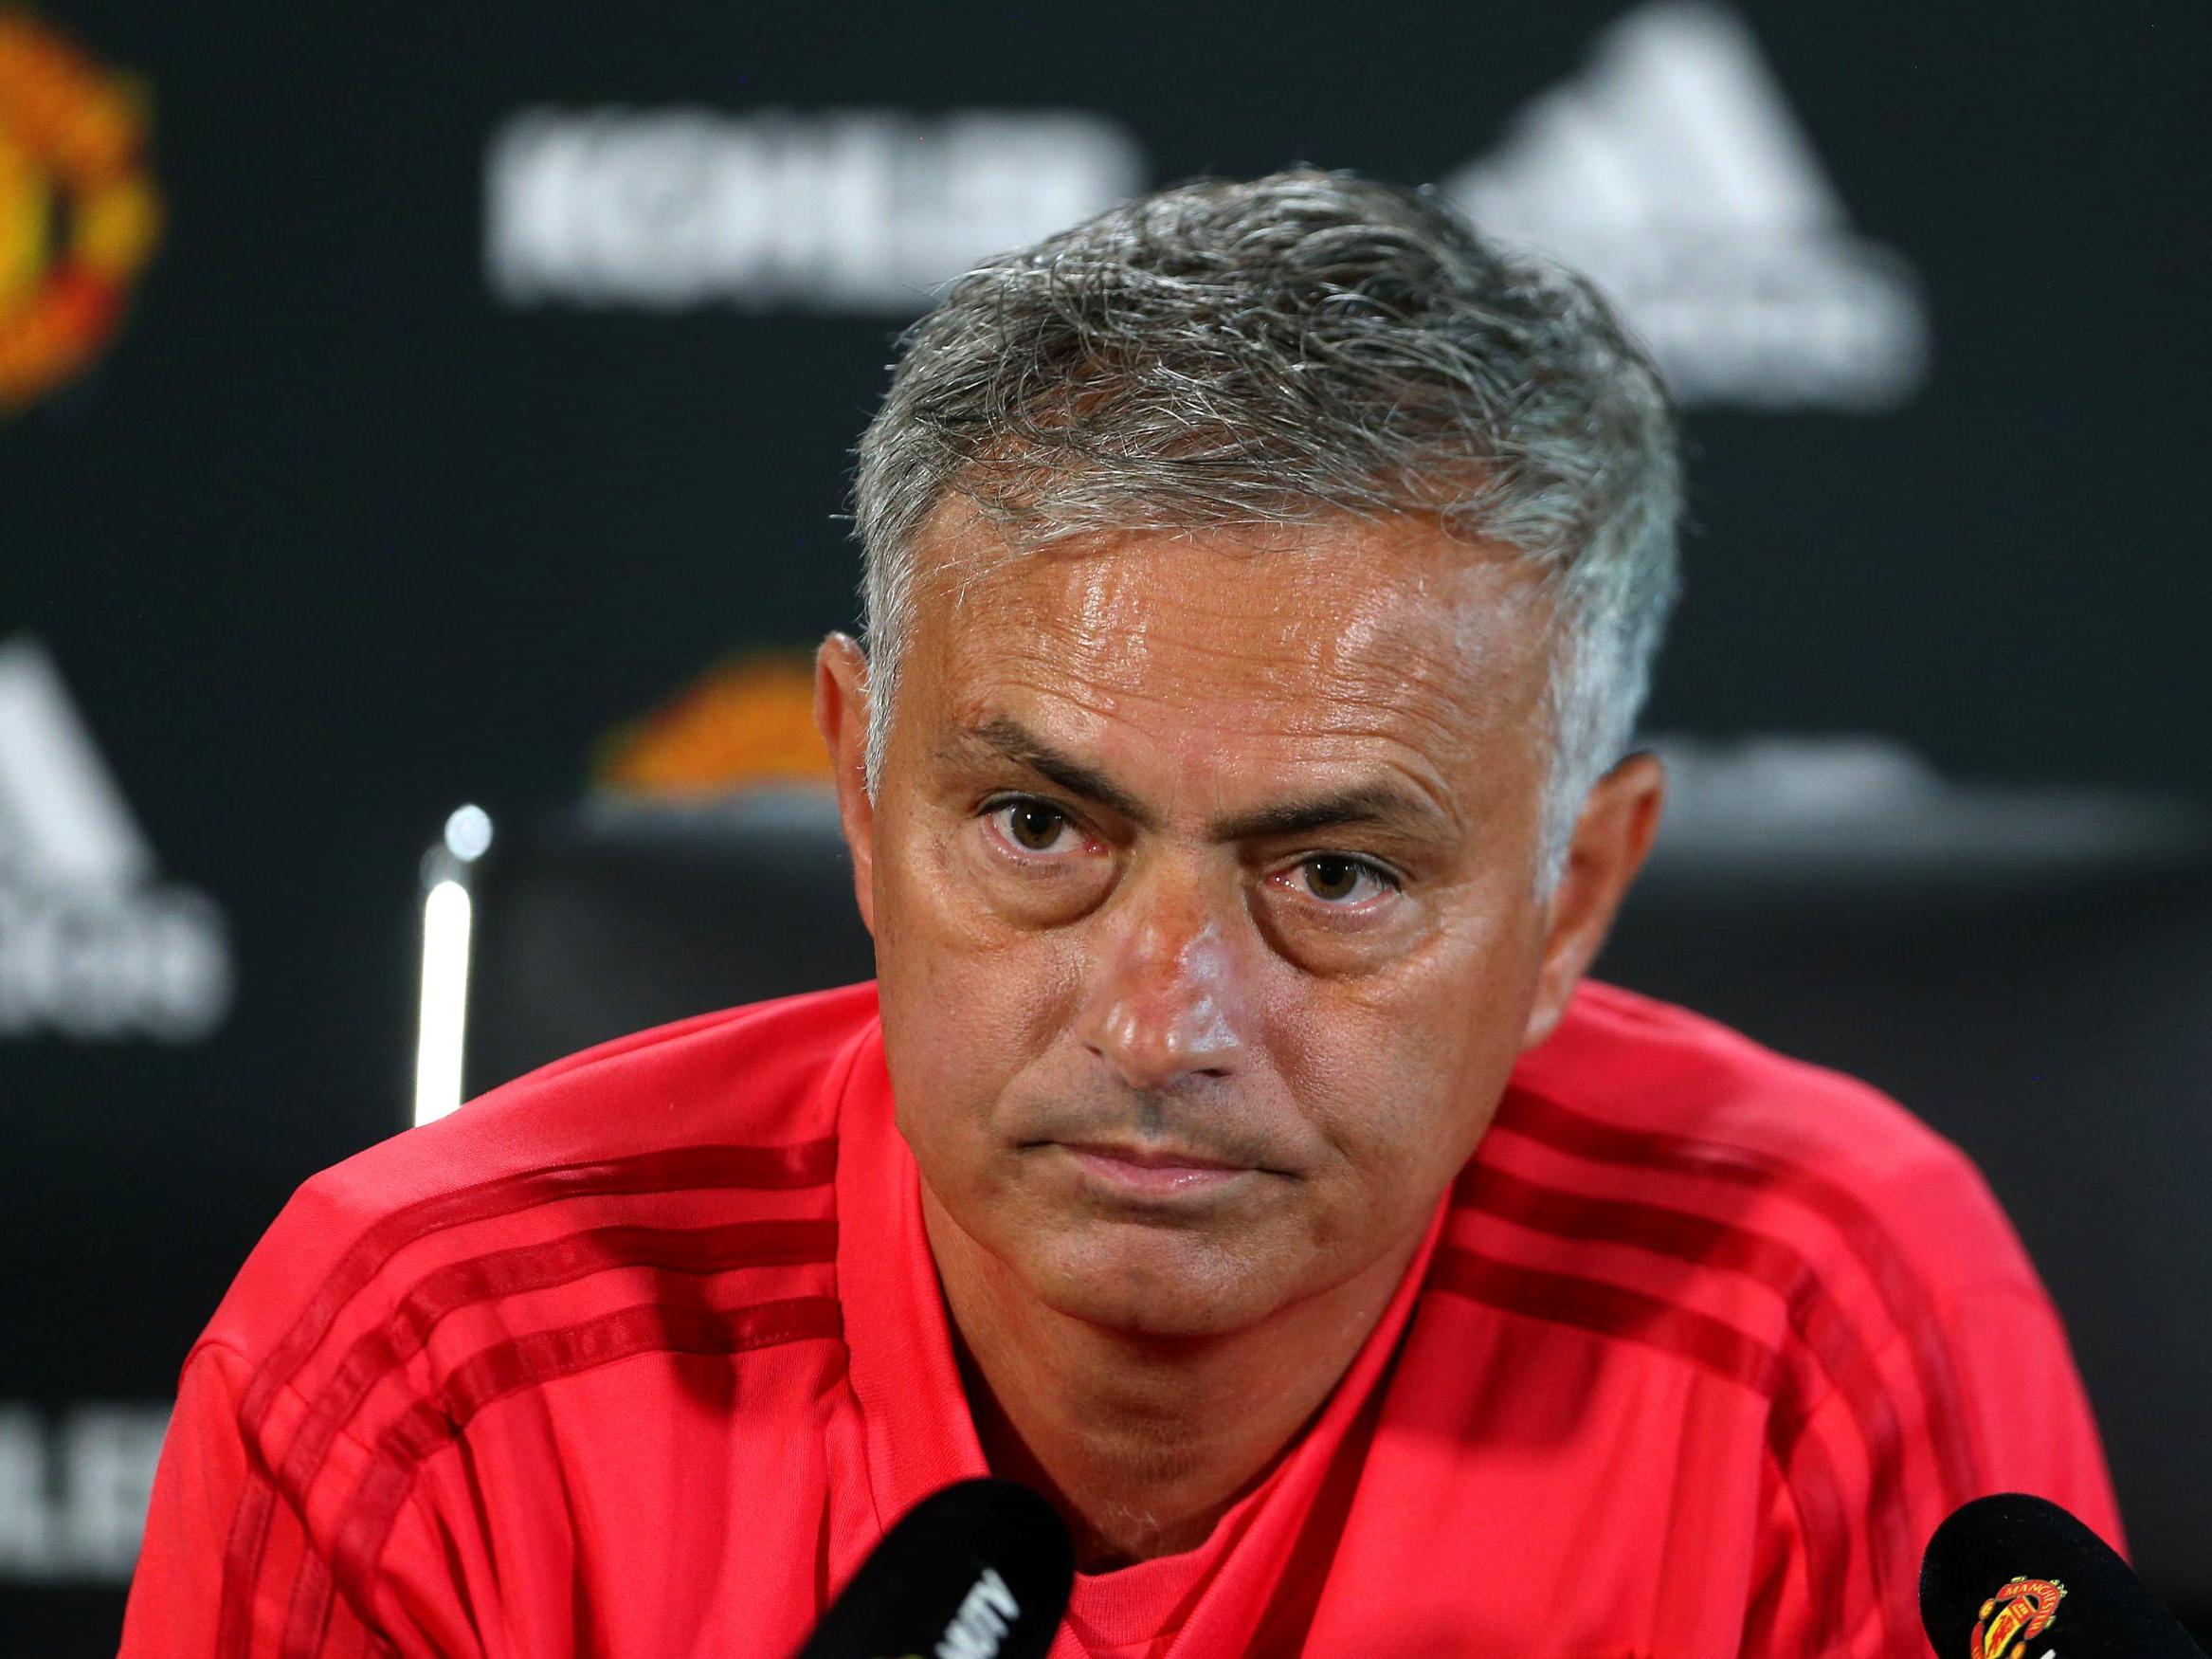 How Jose Mourinho&apos;s non-press conference has put more pressure on Manchester United, not less